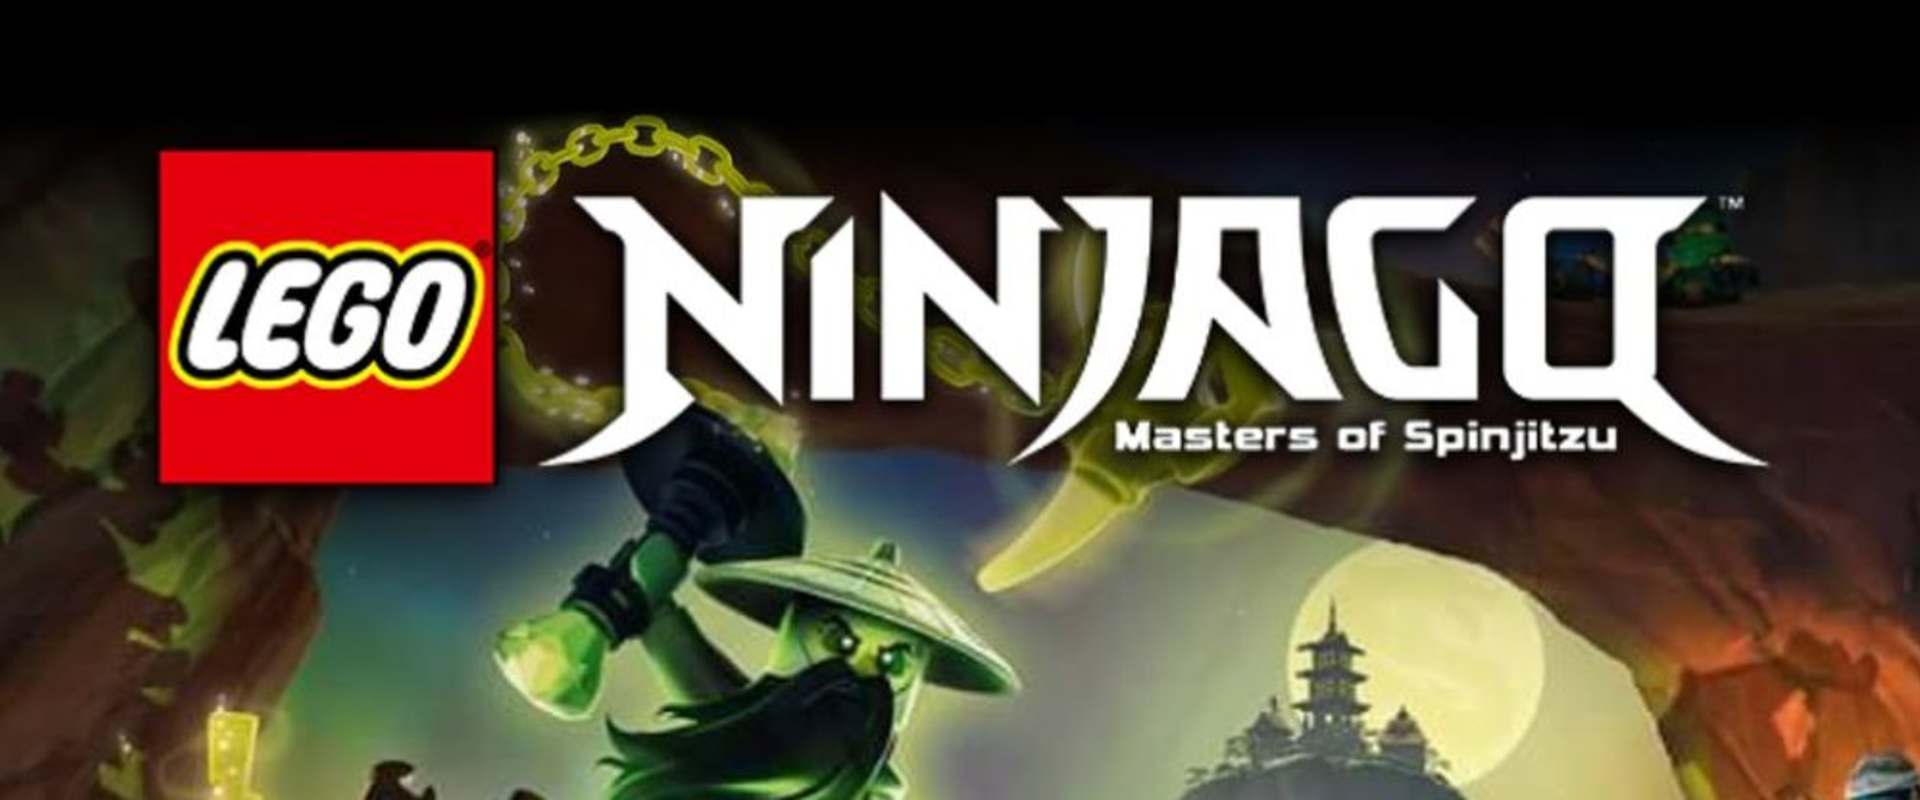 Ninjago: Masters of Spinjitzu - Day of the Departed background 2